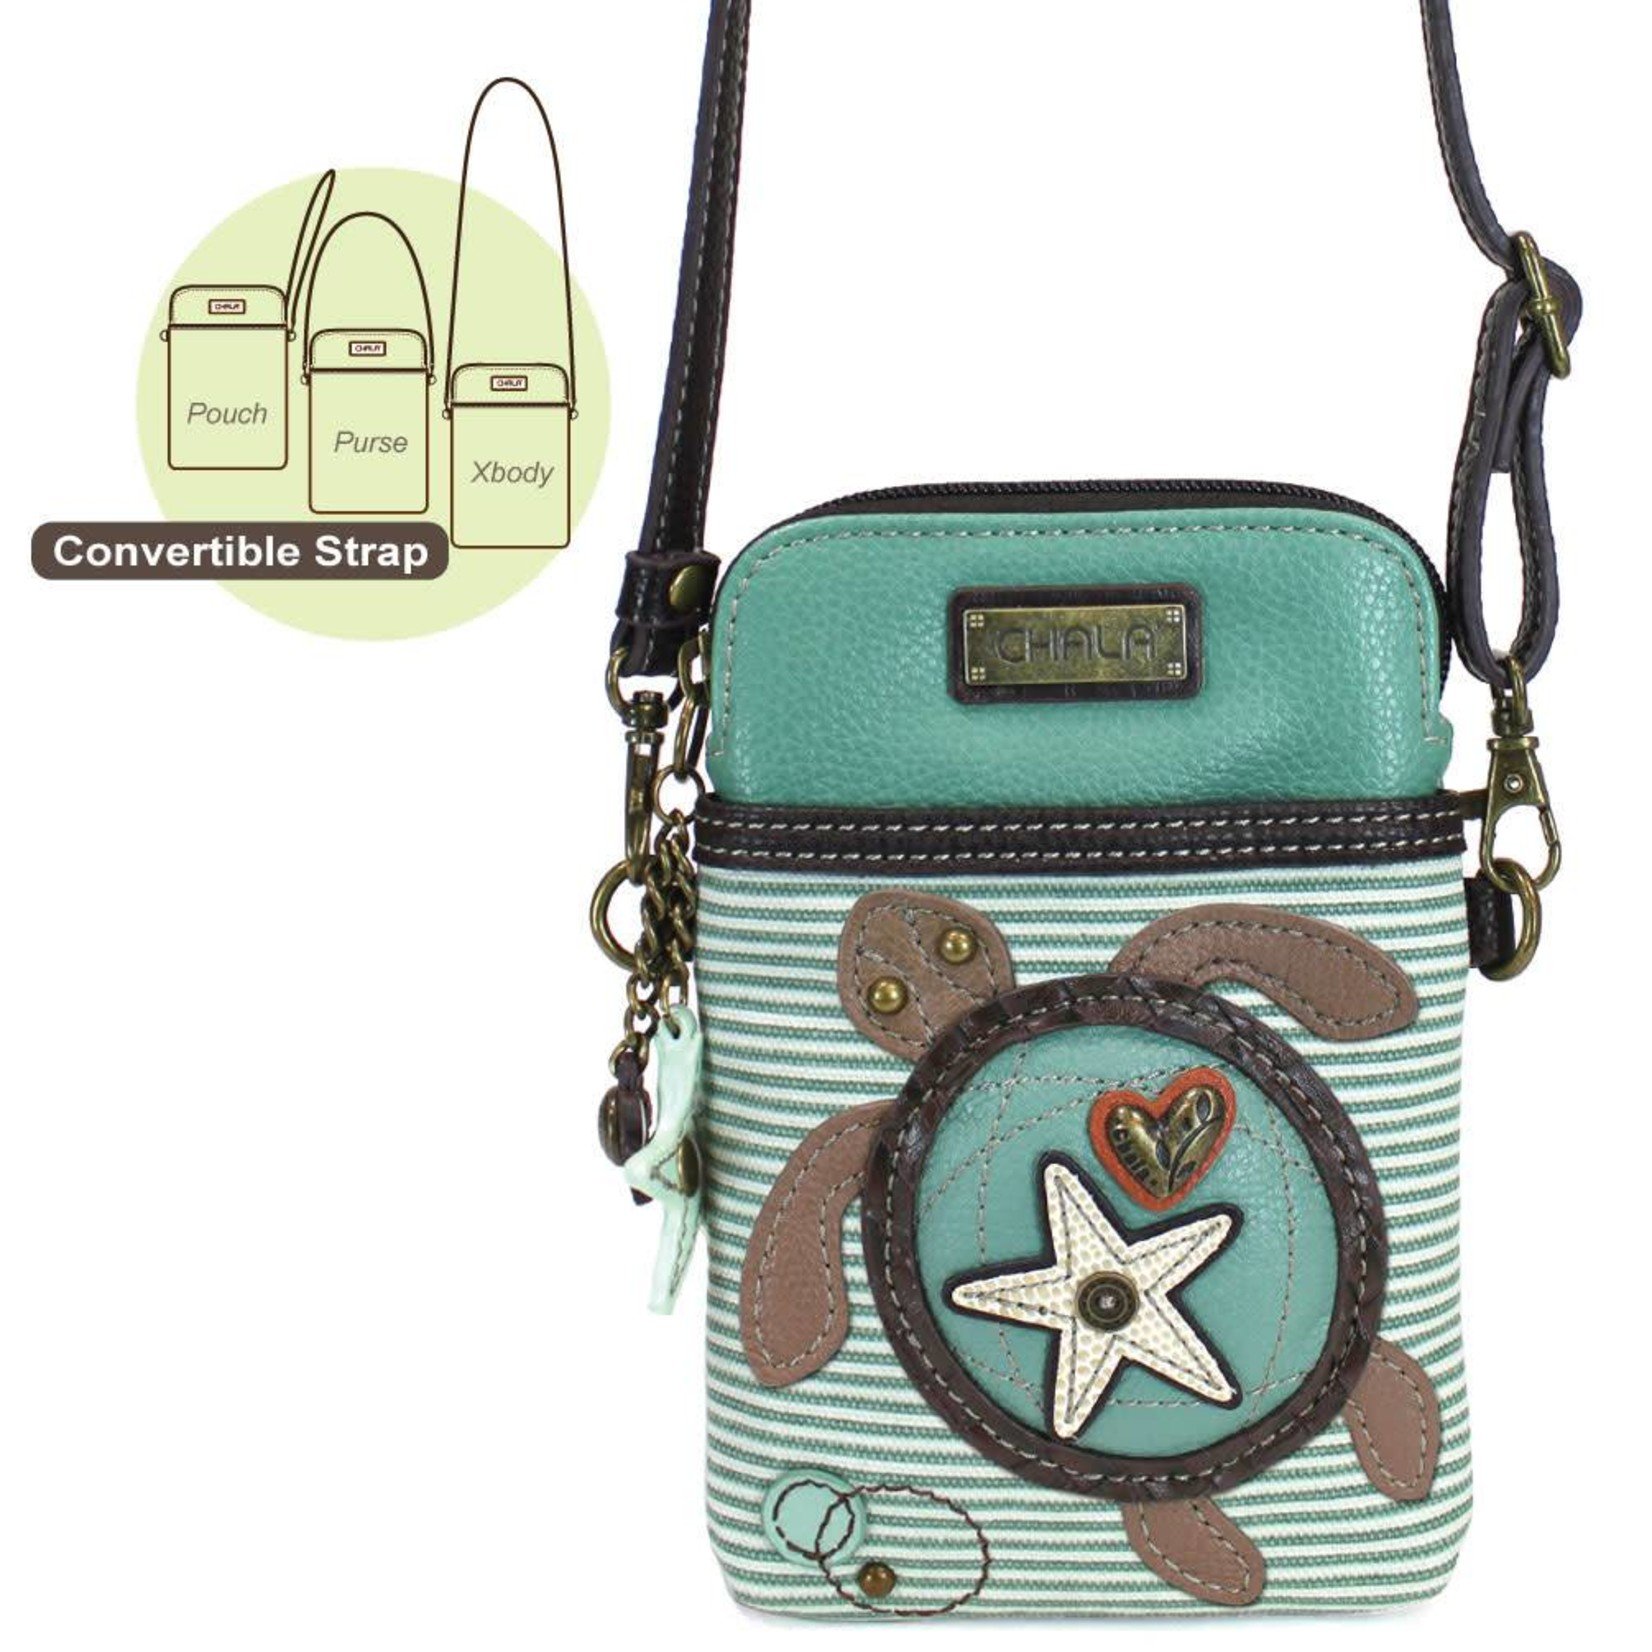 Chala Dragonfly Wallet Crossbody Purse Teal & Brown 7” x 4.5” Colorful